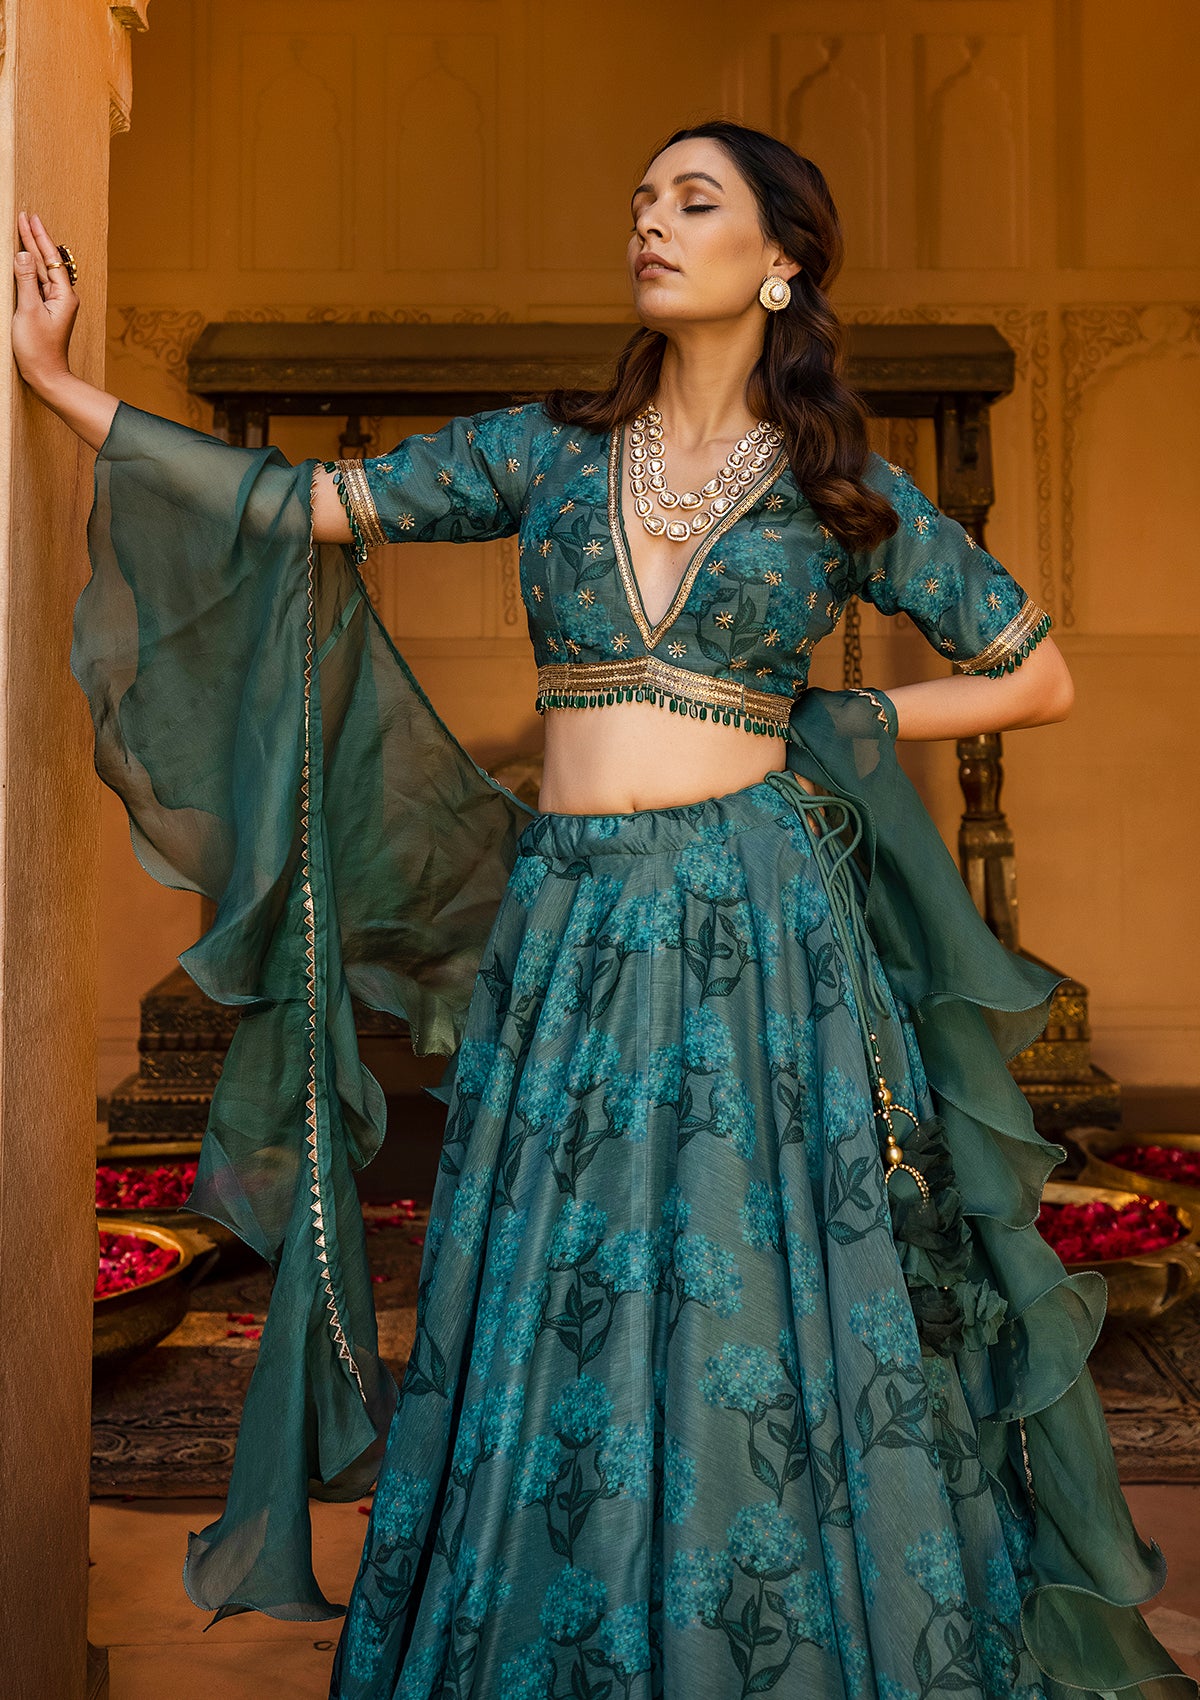 Exquisite Bottle-Green Sequined Silk Ready-To-Wear Crop-Top Lehenga | Crop  top lehenga, Wear crop top, Lehenga choli